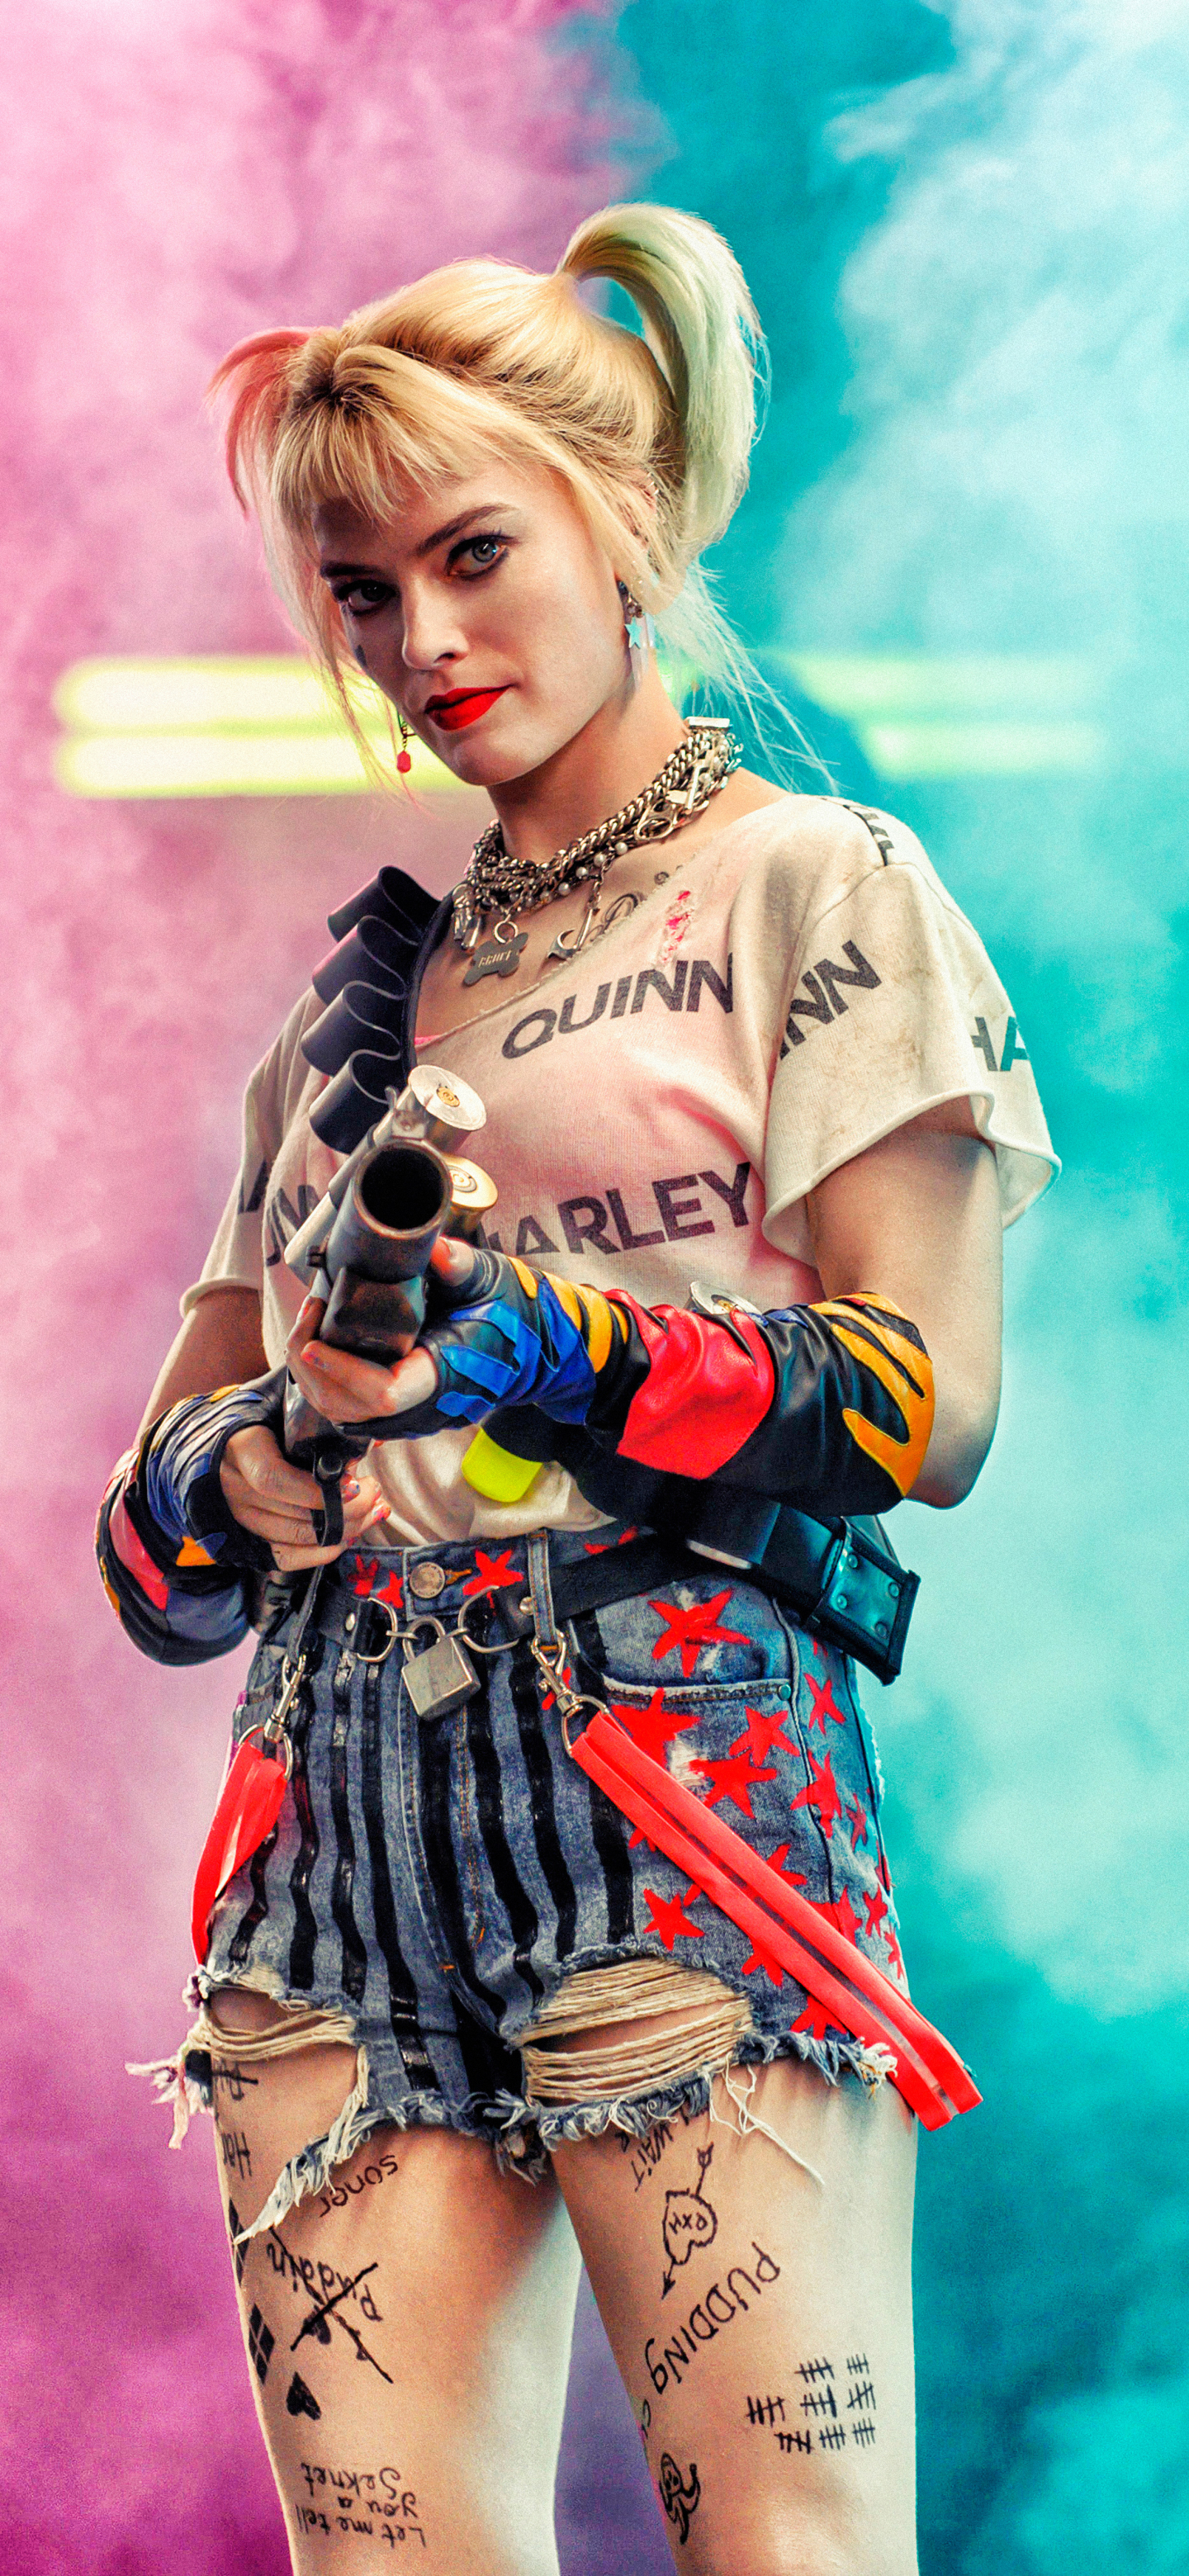 birds of prey (and the fantabulous emancipation of one harley quinn), margot robbie, movie, twintails, harley quinn, dc comics, harleen quinzel